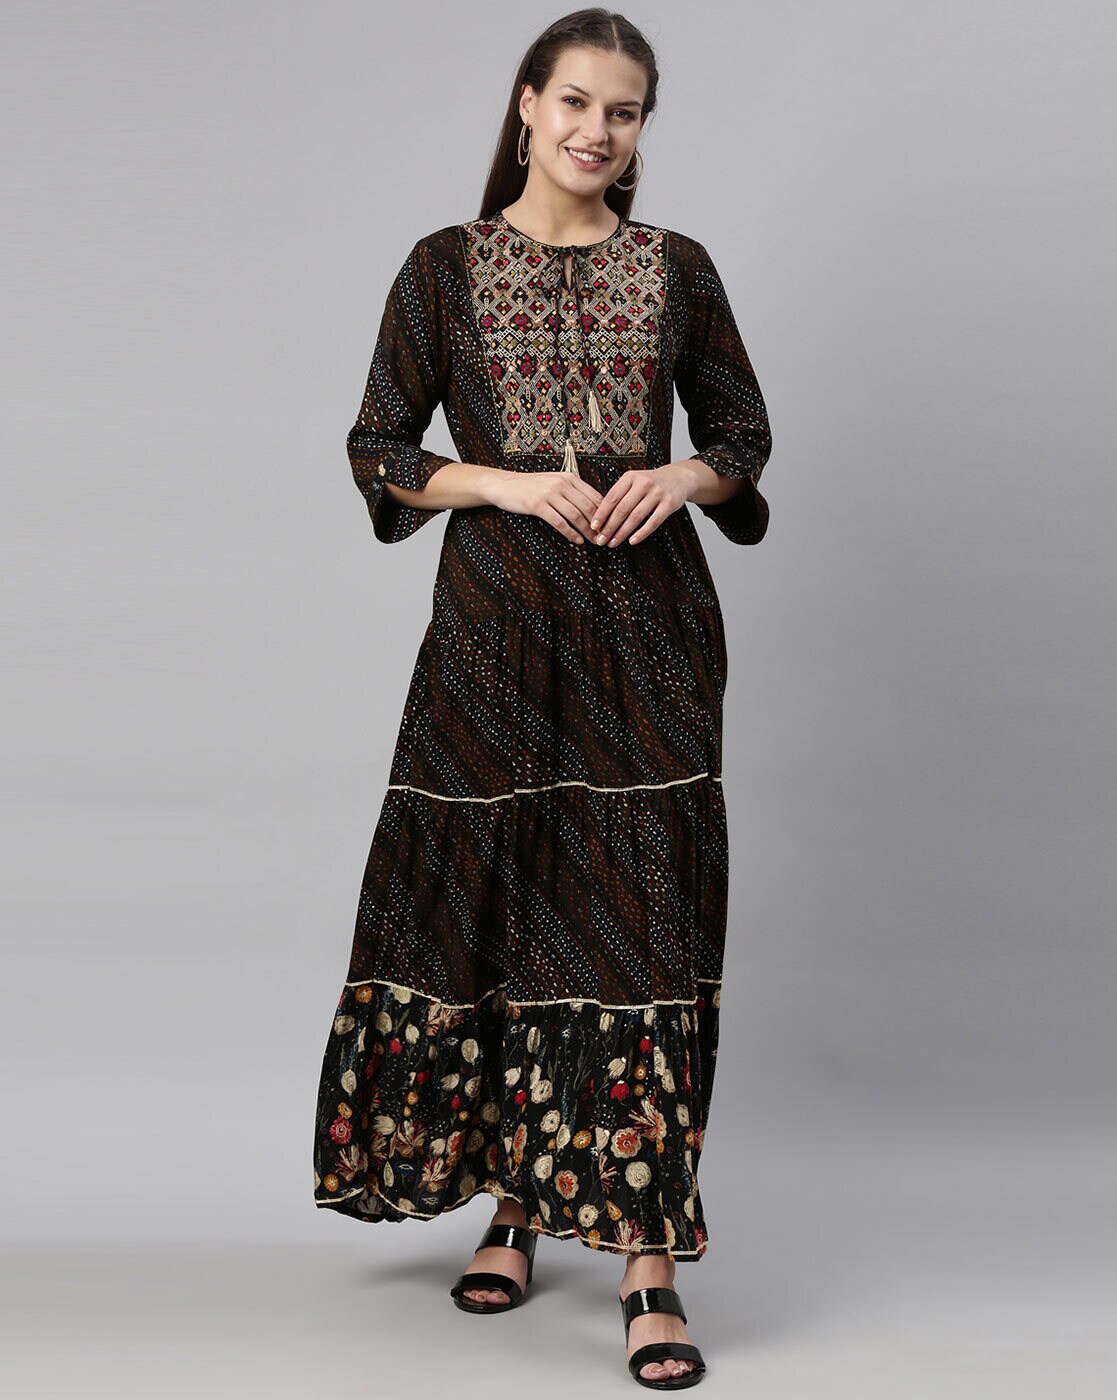 Neerus India - Get ready to stock up your ethnic wear... | Facebook